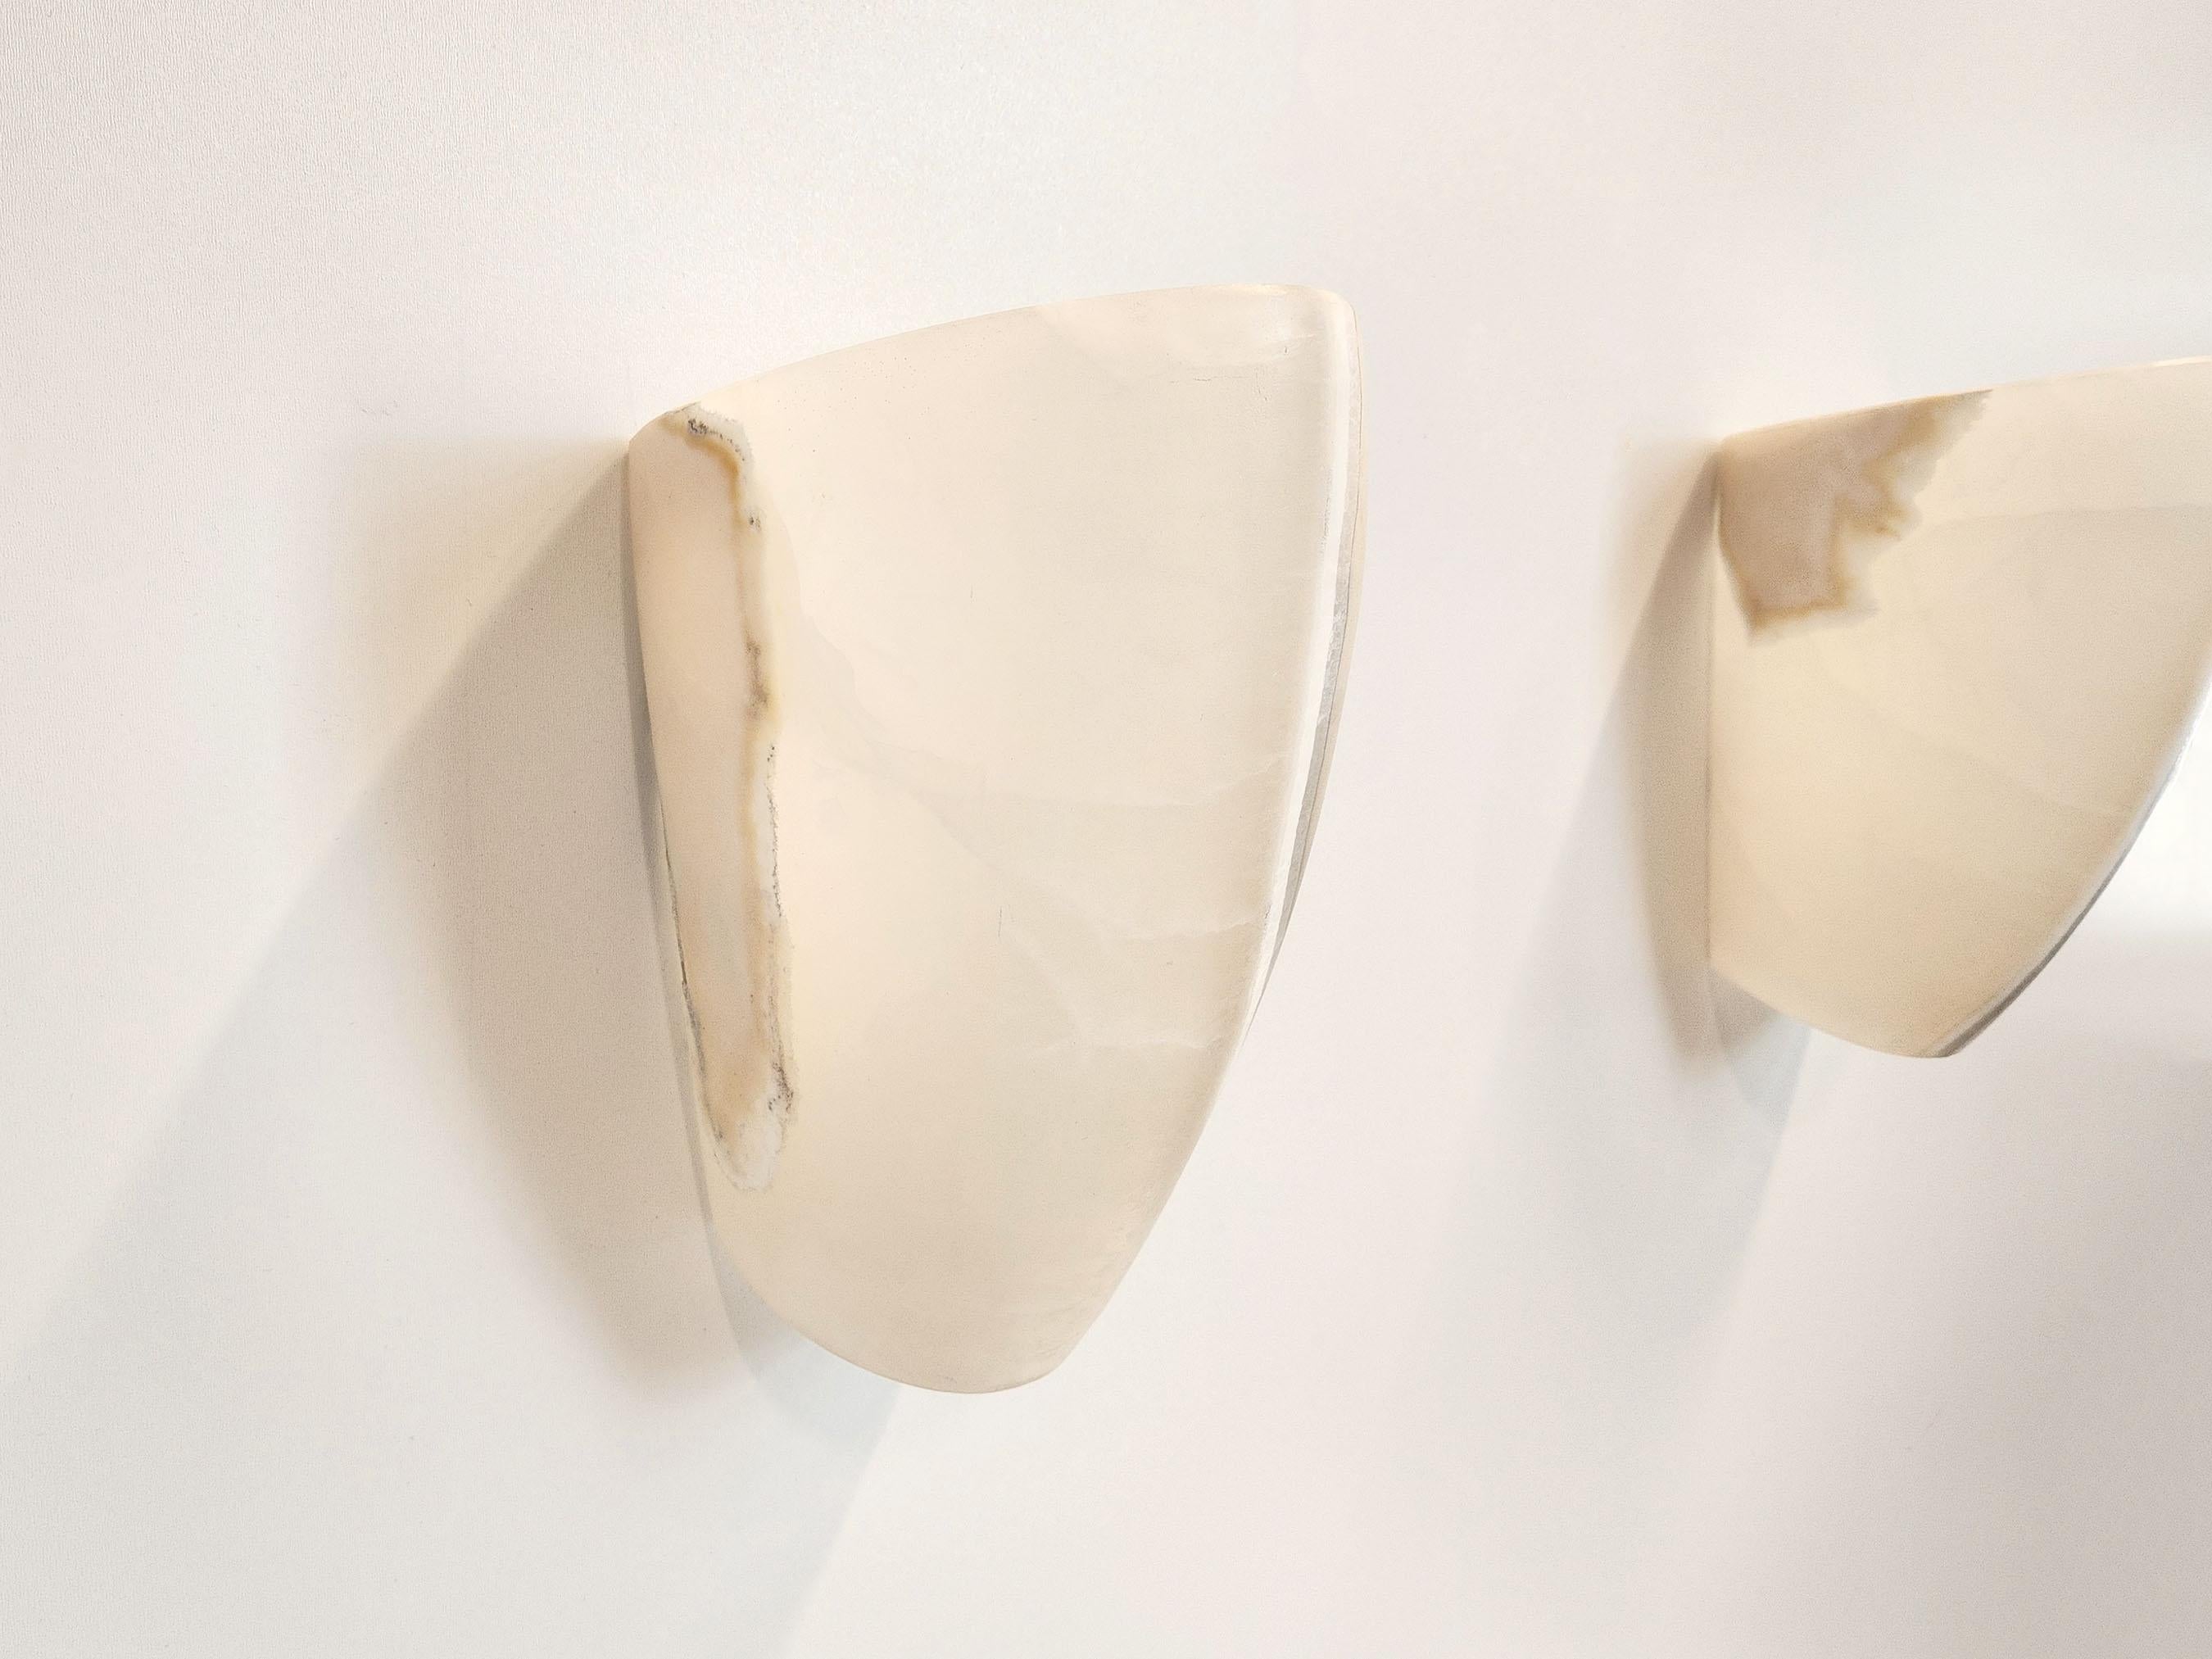 Contemporary Hand-carved White Onyx Wall Sconces with Natural Dark Veins For Sale